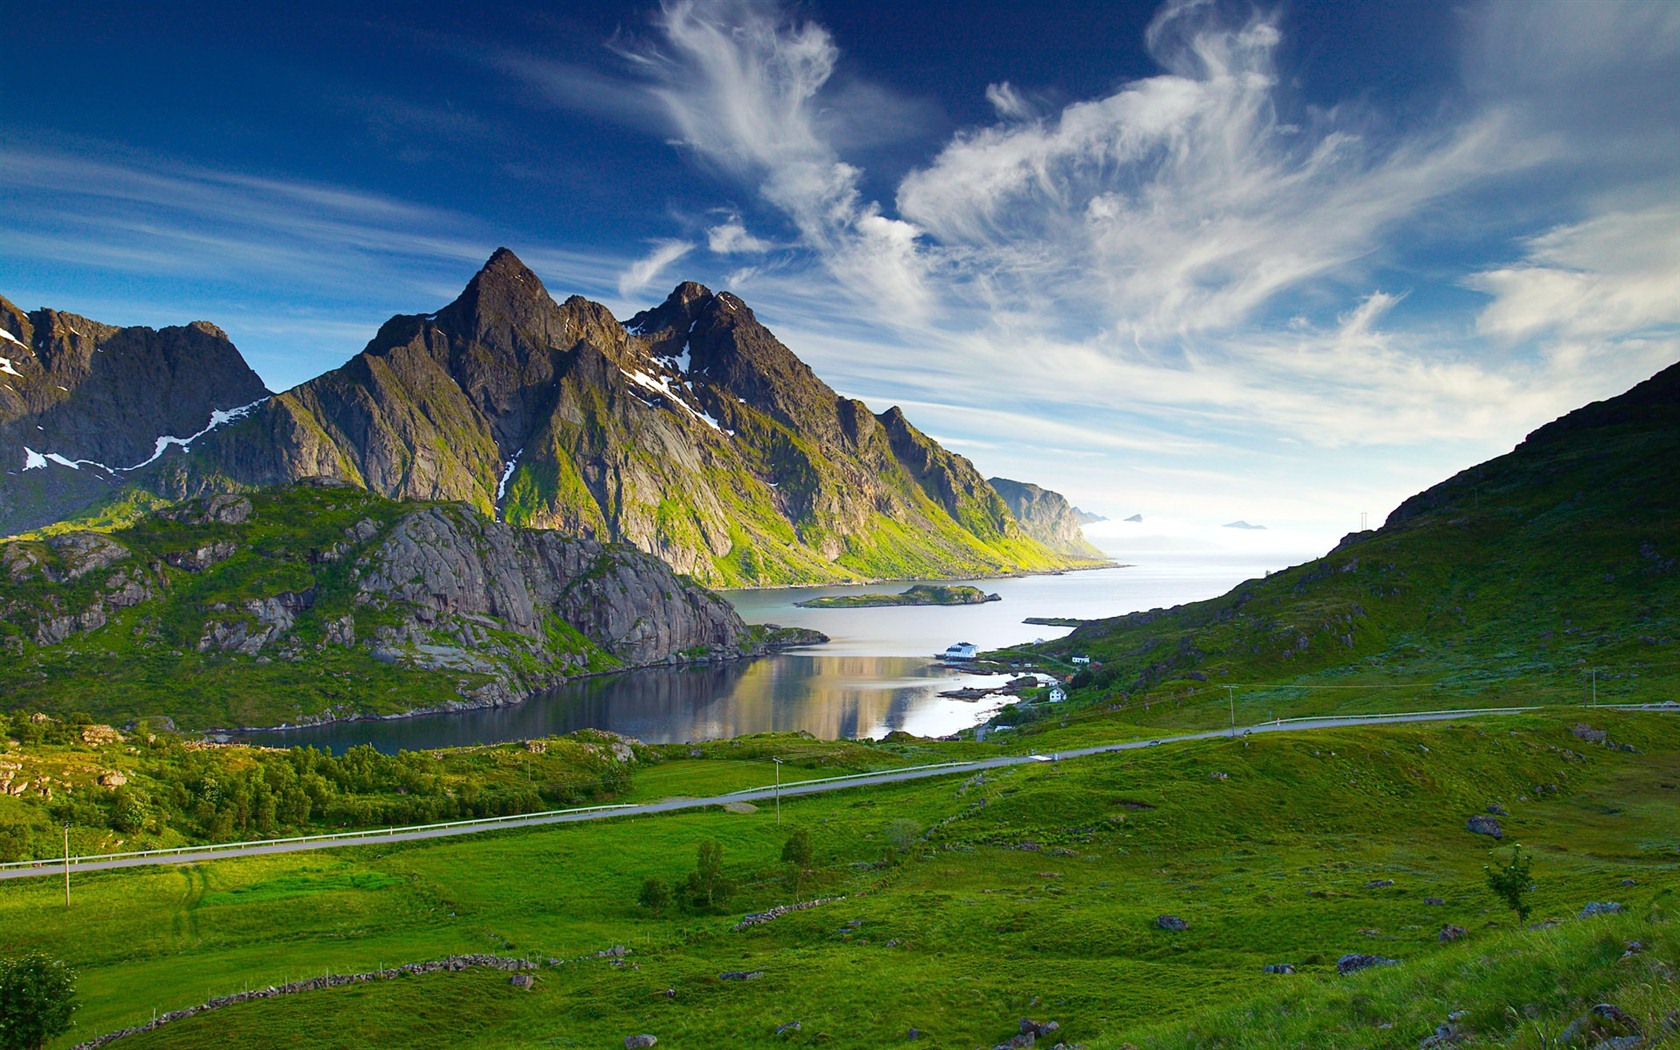 Windows 7 Wallpapers: Nordic Landscapes #1 - 1680x1050